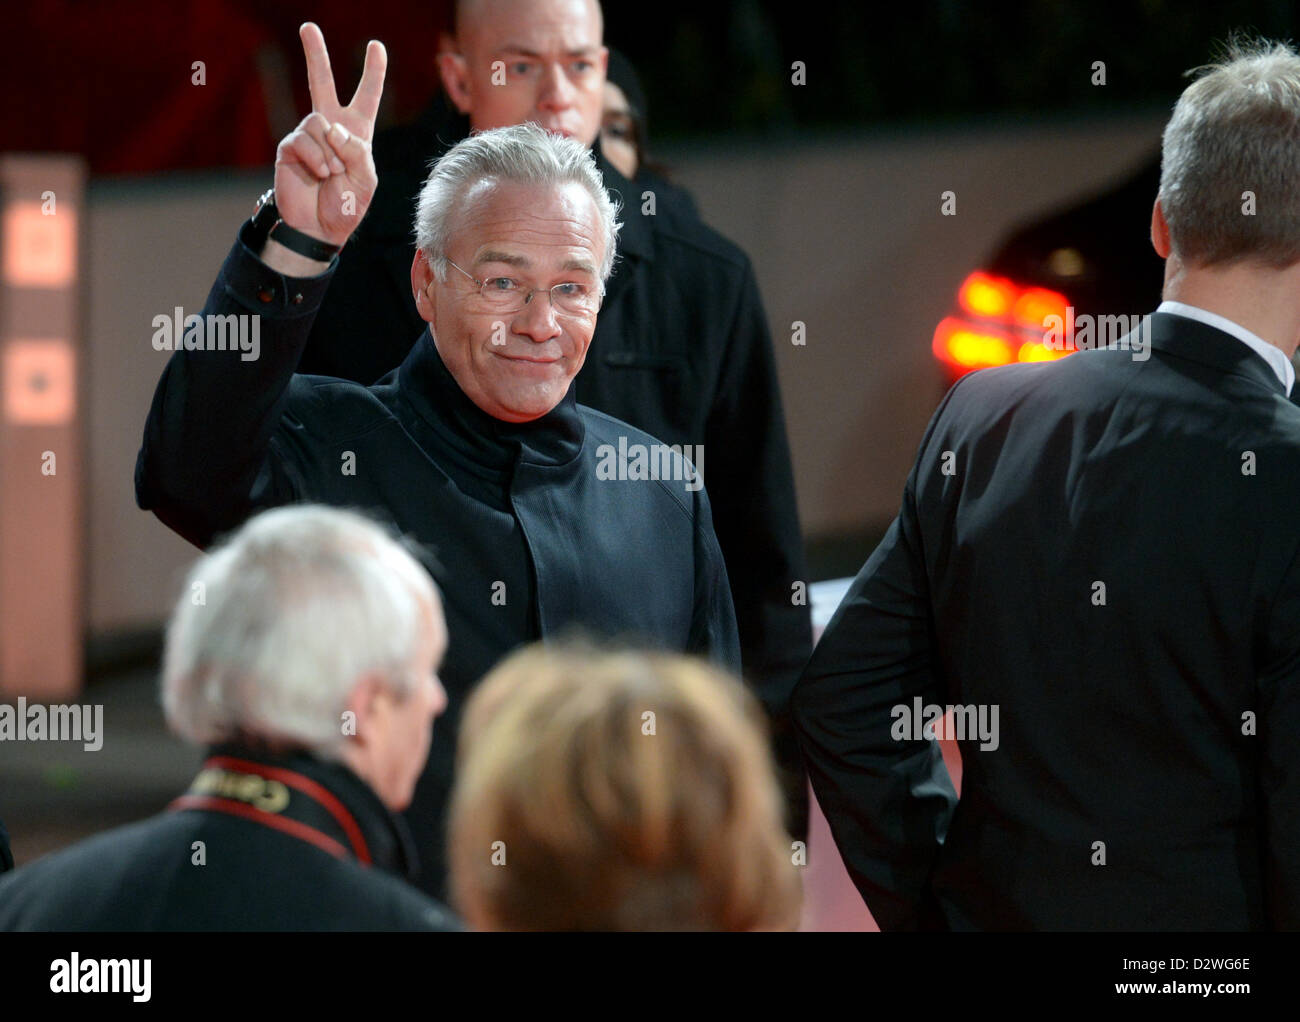 German actor Klaus J. Behrendt arrives for the 48th Golden Camera award ceremony in Berlin, Germany, 2 February 2013. The award honours outstanding achievements in television, film and entertainment. Photo: Maurizio Gambarini/dpa  +++(c) dpa - Bildfunk+++ Stock Photo